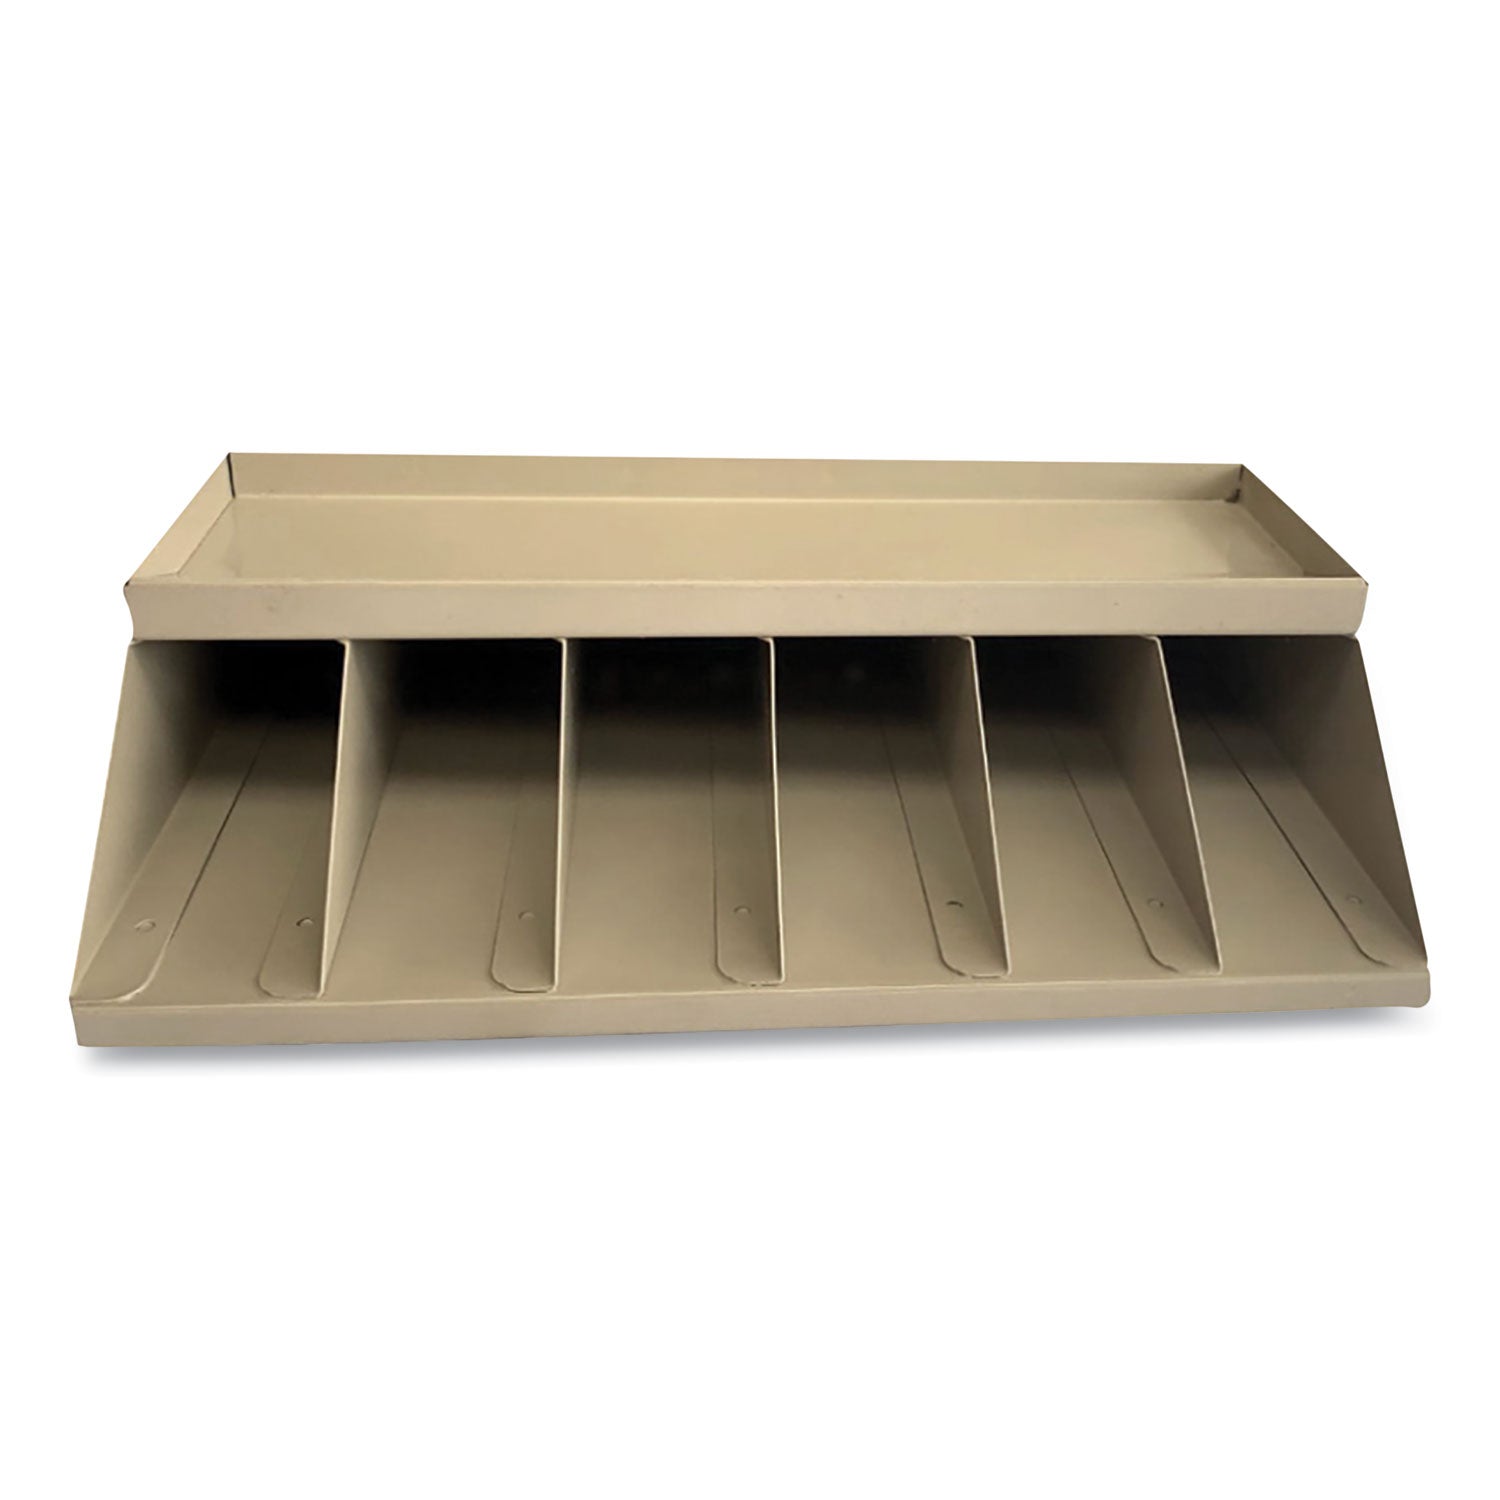 coin-wrapper-and-bill-strap-single-tier-rack-6-compartments-10-x-85-x-3-steel-pebble-beige_cnk500014 - 1